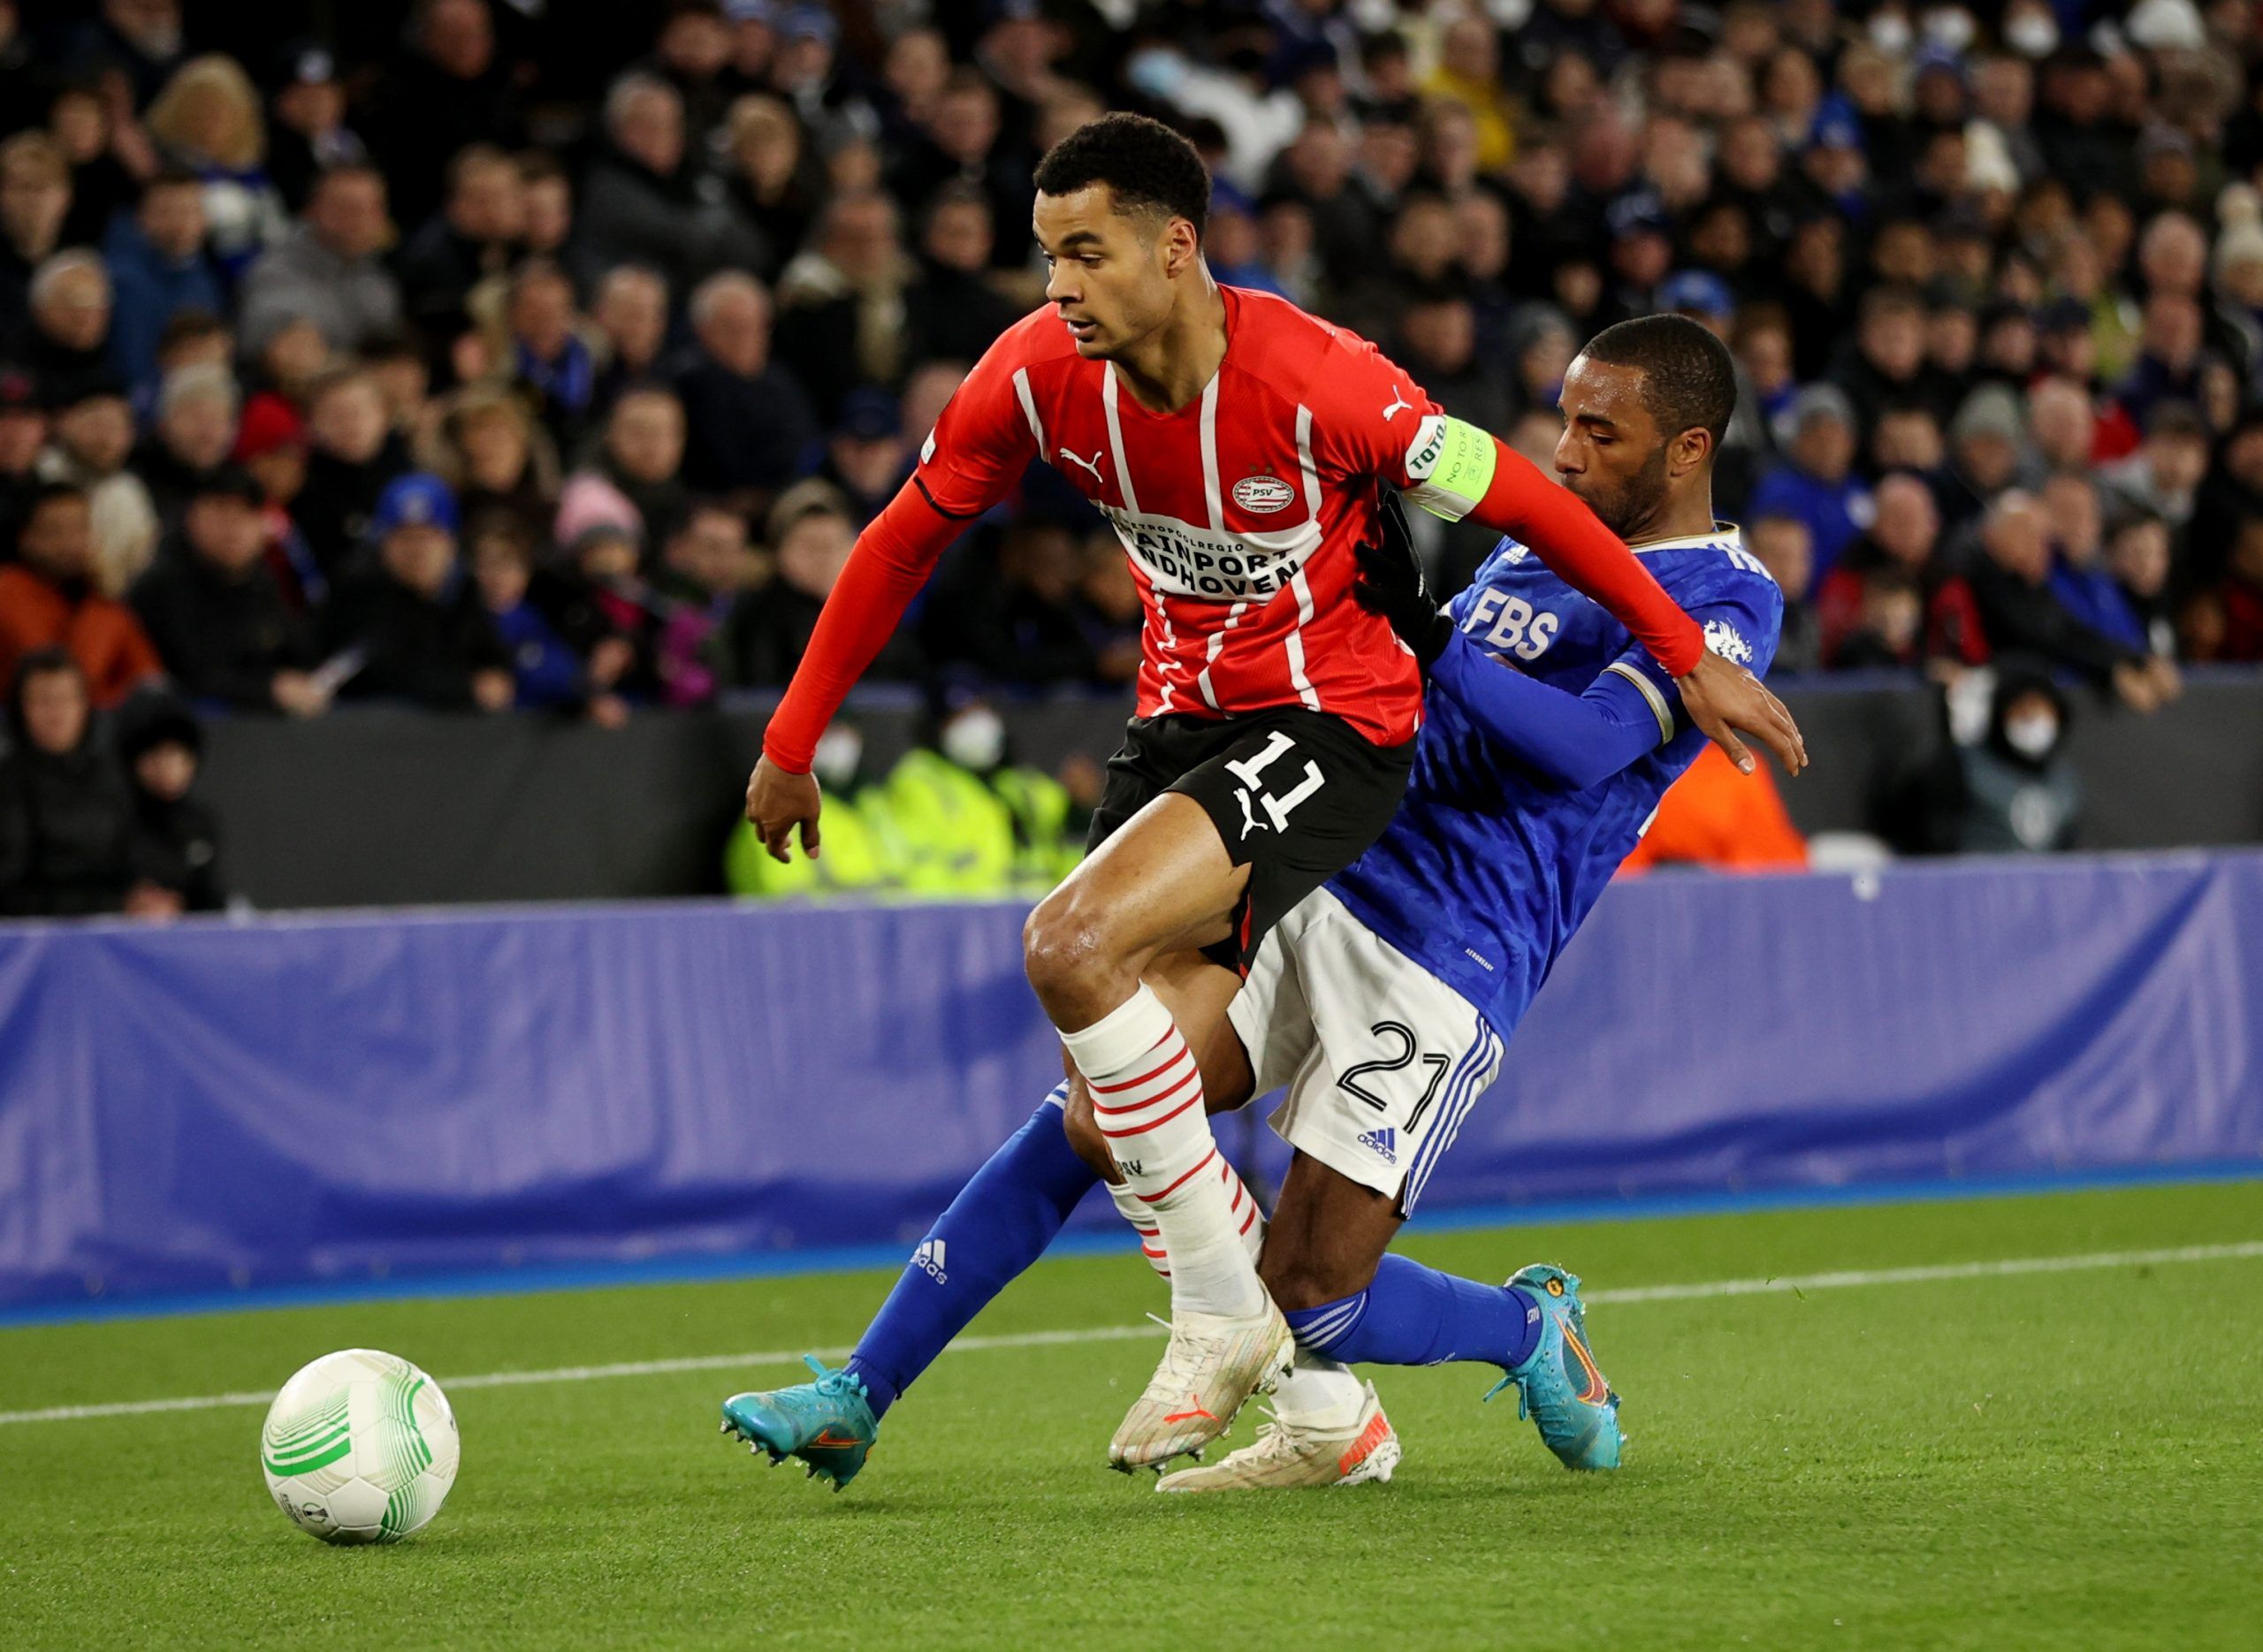 Soccer Football - Europa League - Quarter Final - First Leg - Leicester City v PSV Eindhoven - King Power Stadium, Leicester, Britain - April 7, 2022 Leicester City's Ricardo Pereira in action with PSV Eindhoven's Cody Gakpo Action Images via Reuters/Molly Darlington